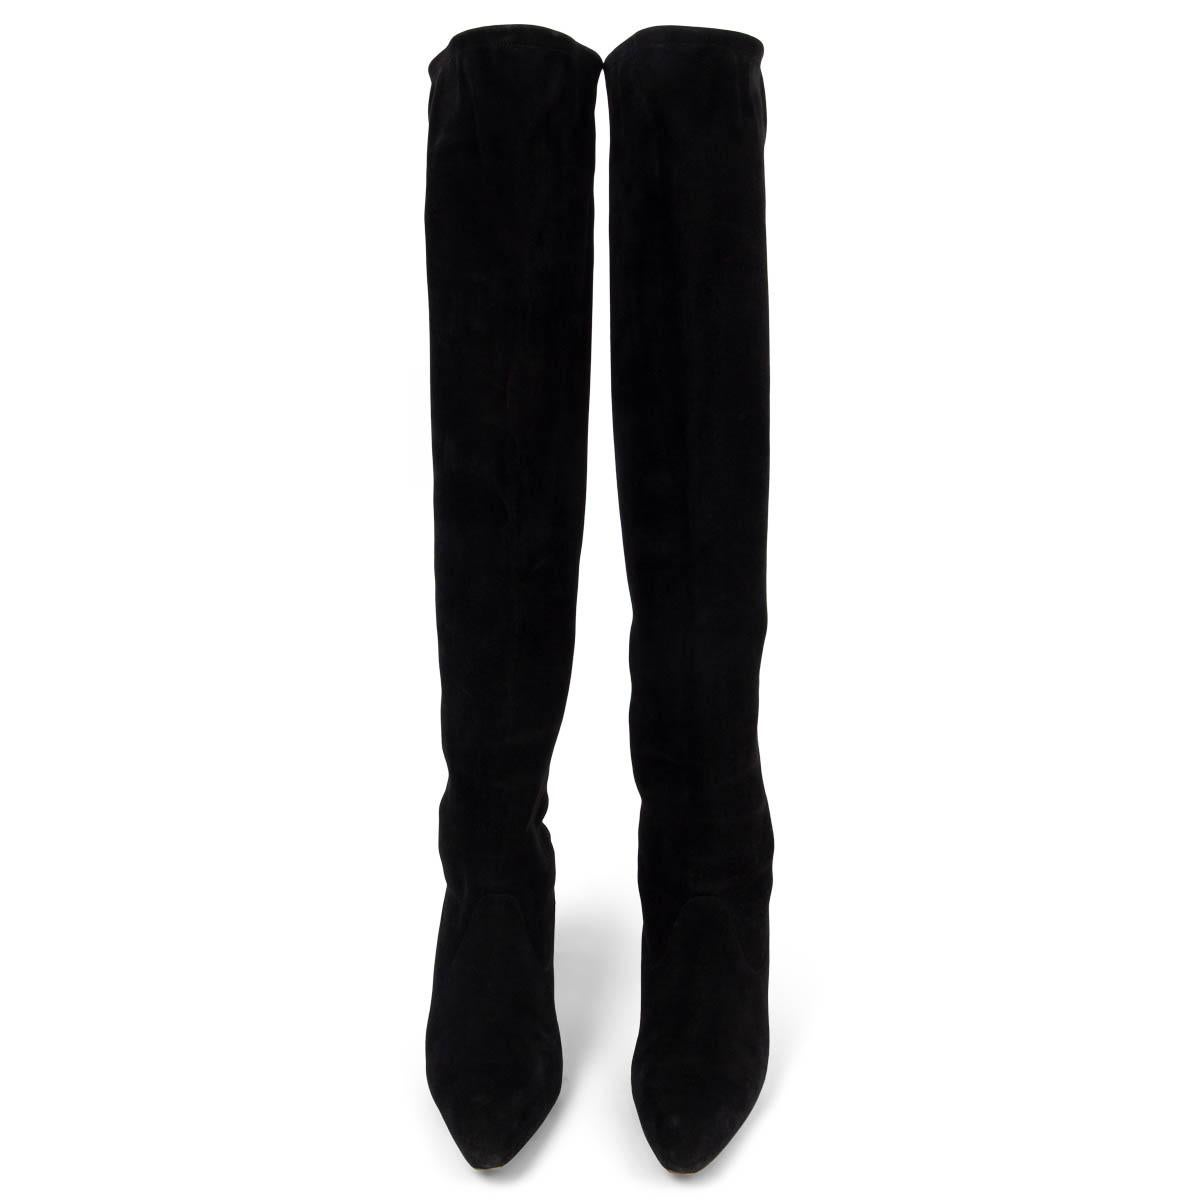 100% authentic Manolo Blahnik pointed-toe knee-high stretchy boots in black suede. Have been worn and show soft creasing on the top. Overall in very good condition. 

Measurements
Imprinted Size	36
Shoe Size	36
Inside Sole	23cm (9in)
Width	7cm